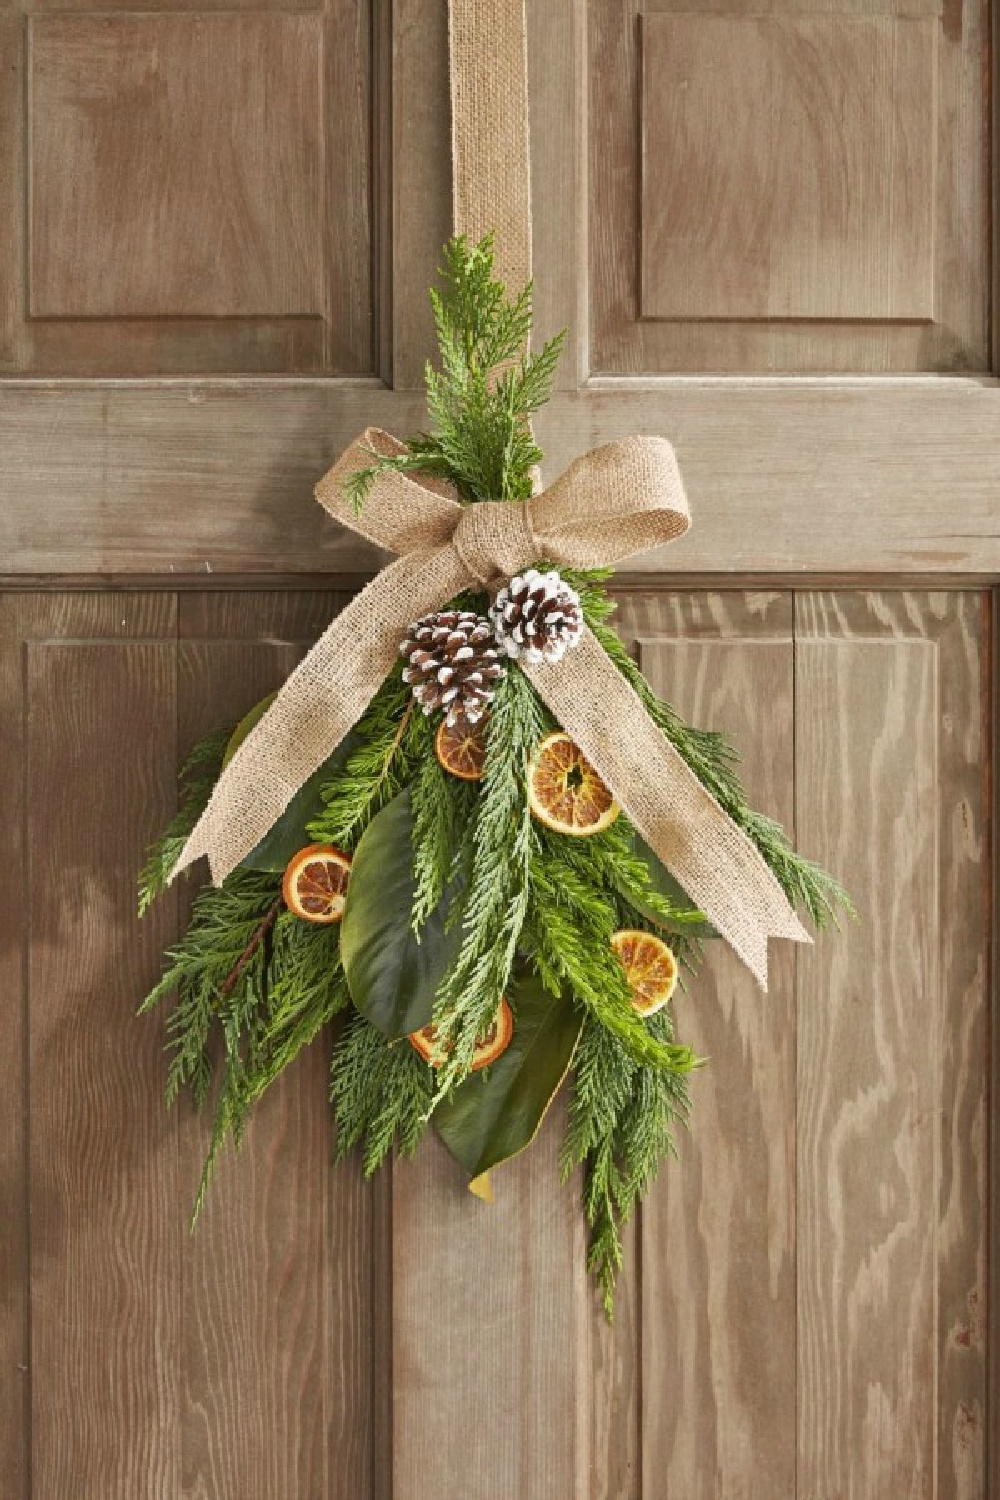 Dried oranges in a Christmas swag on door with greenery and pinecones - Country Living. #christmasdecor #handmadedecor #greenery #driedoranges